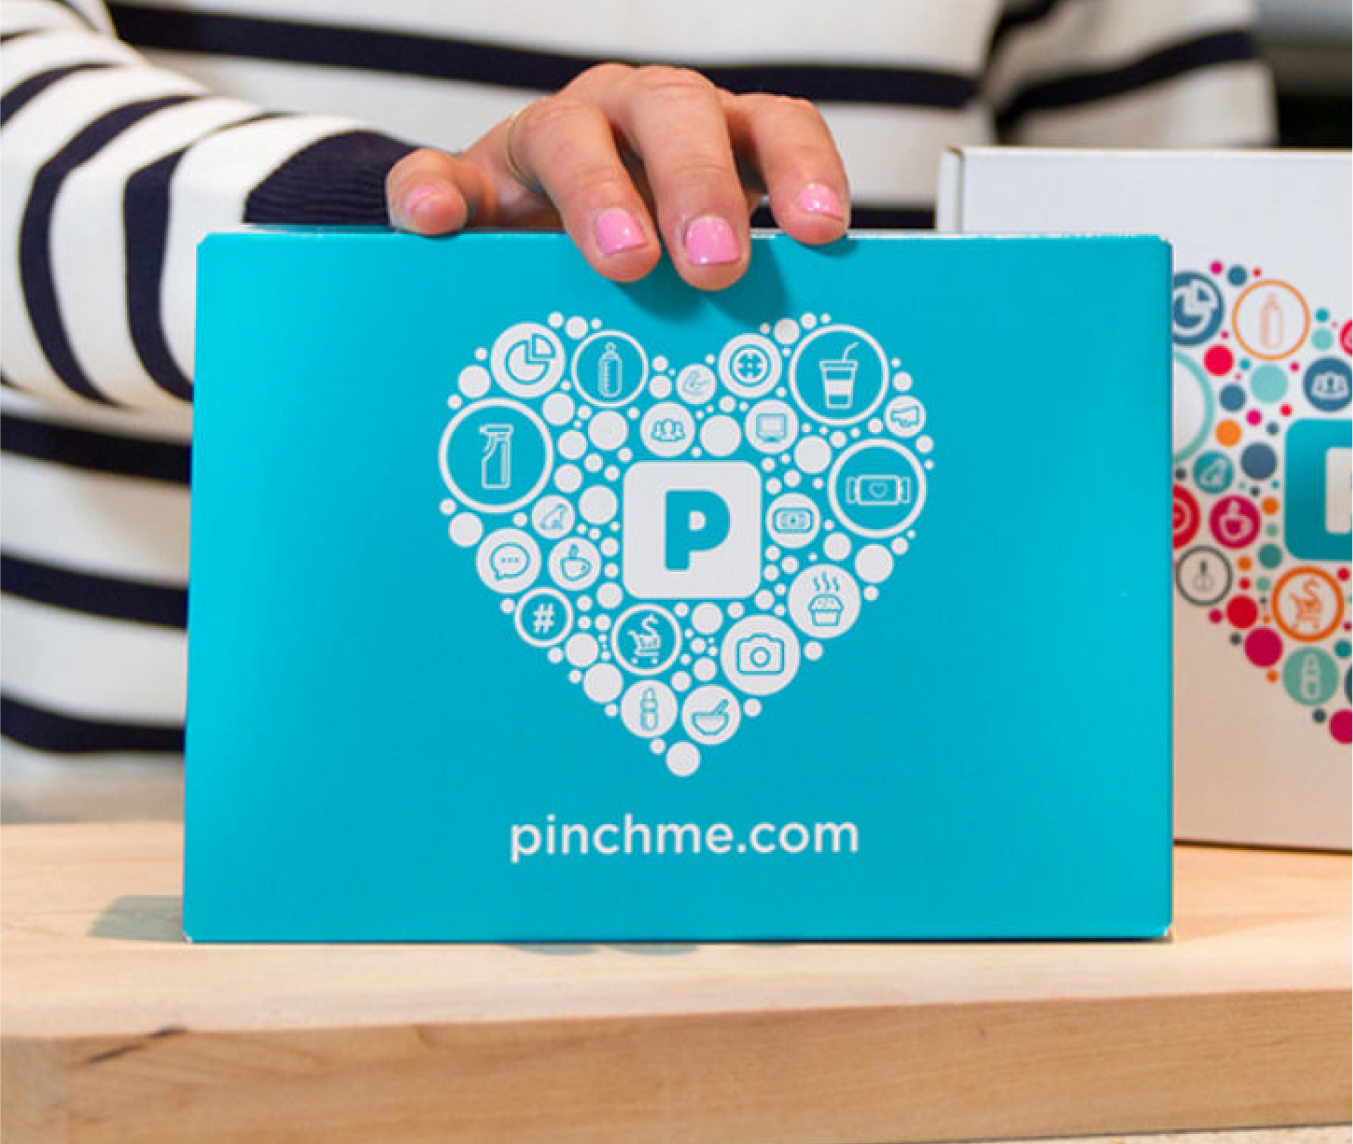 PINCHme box with samples inside.